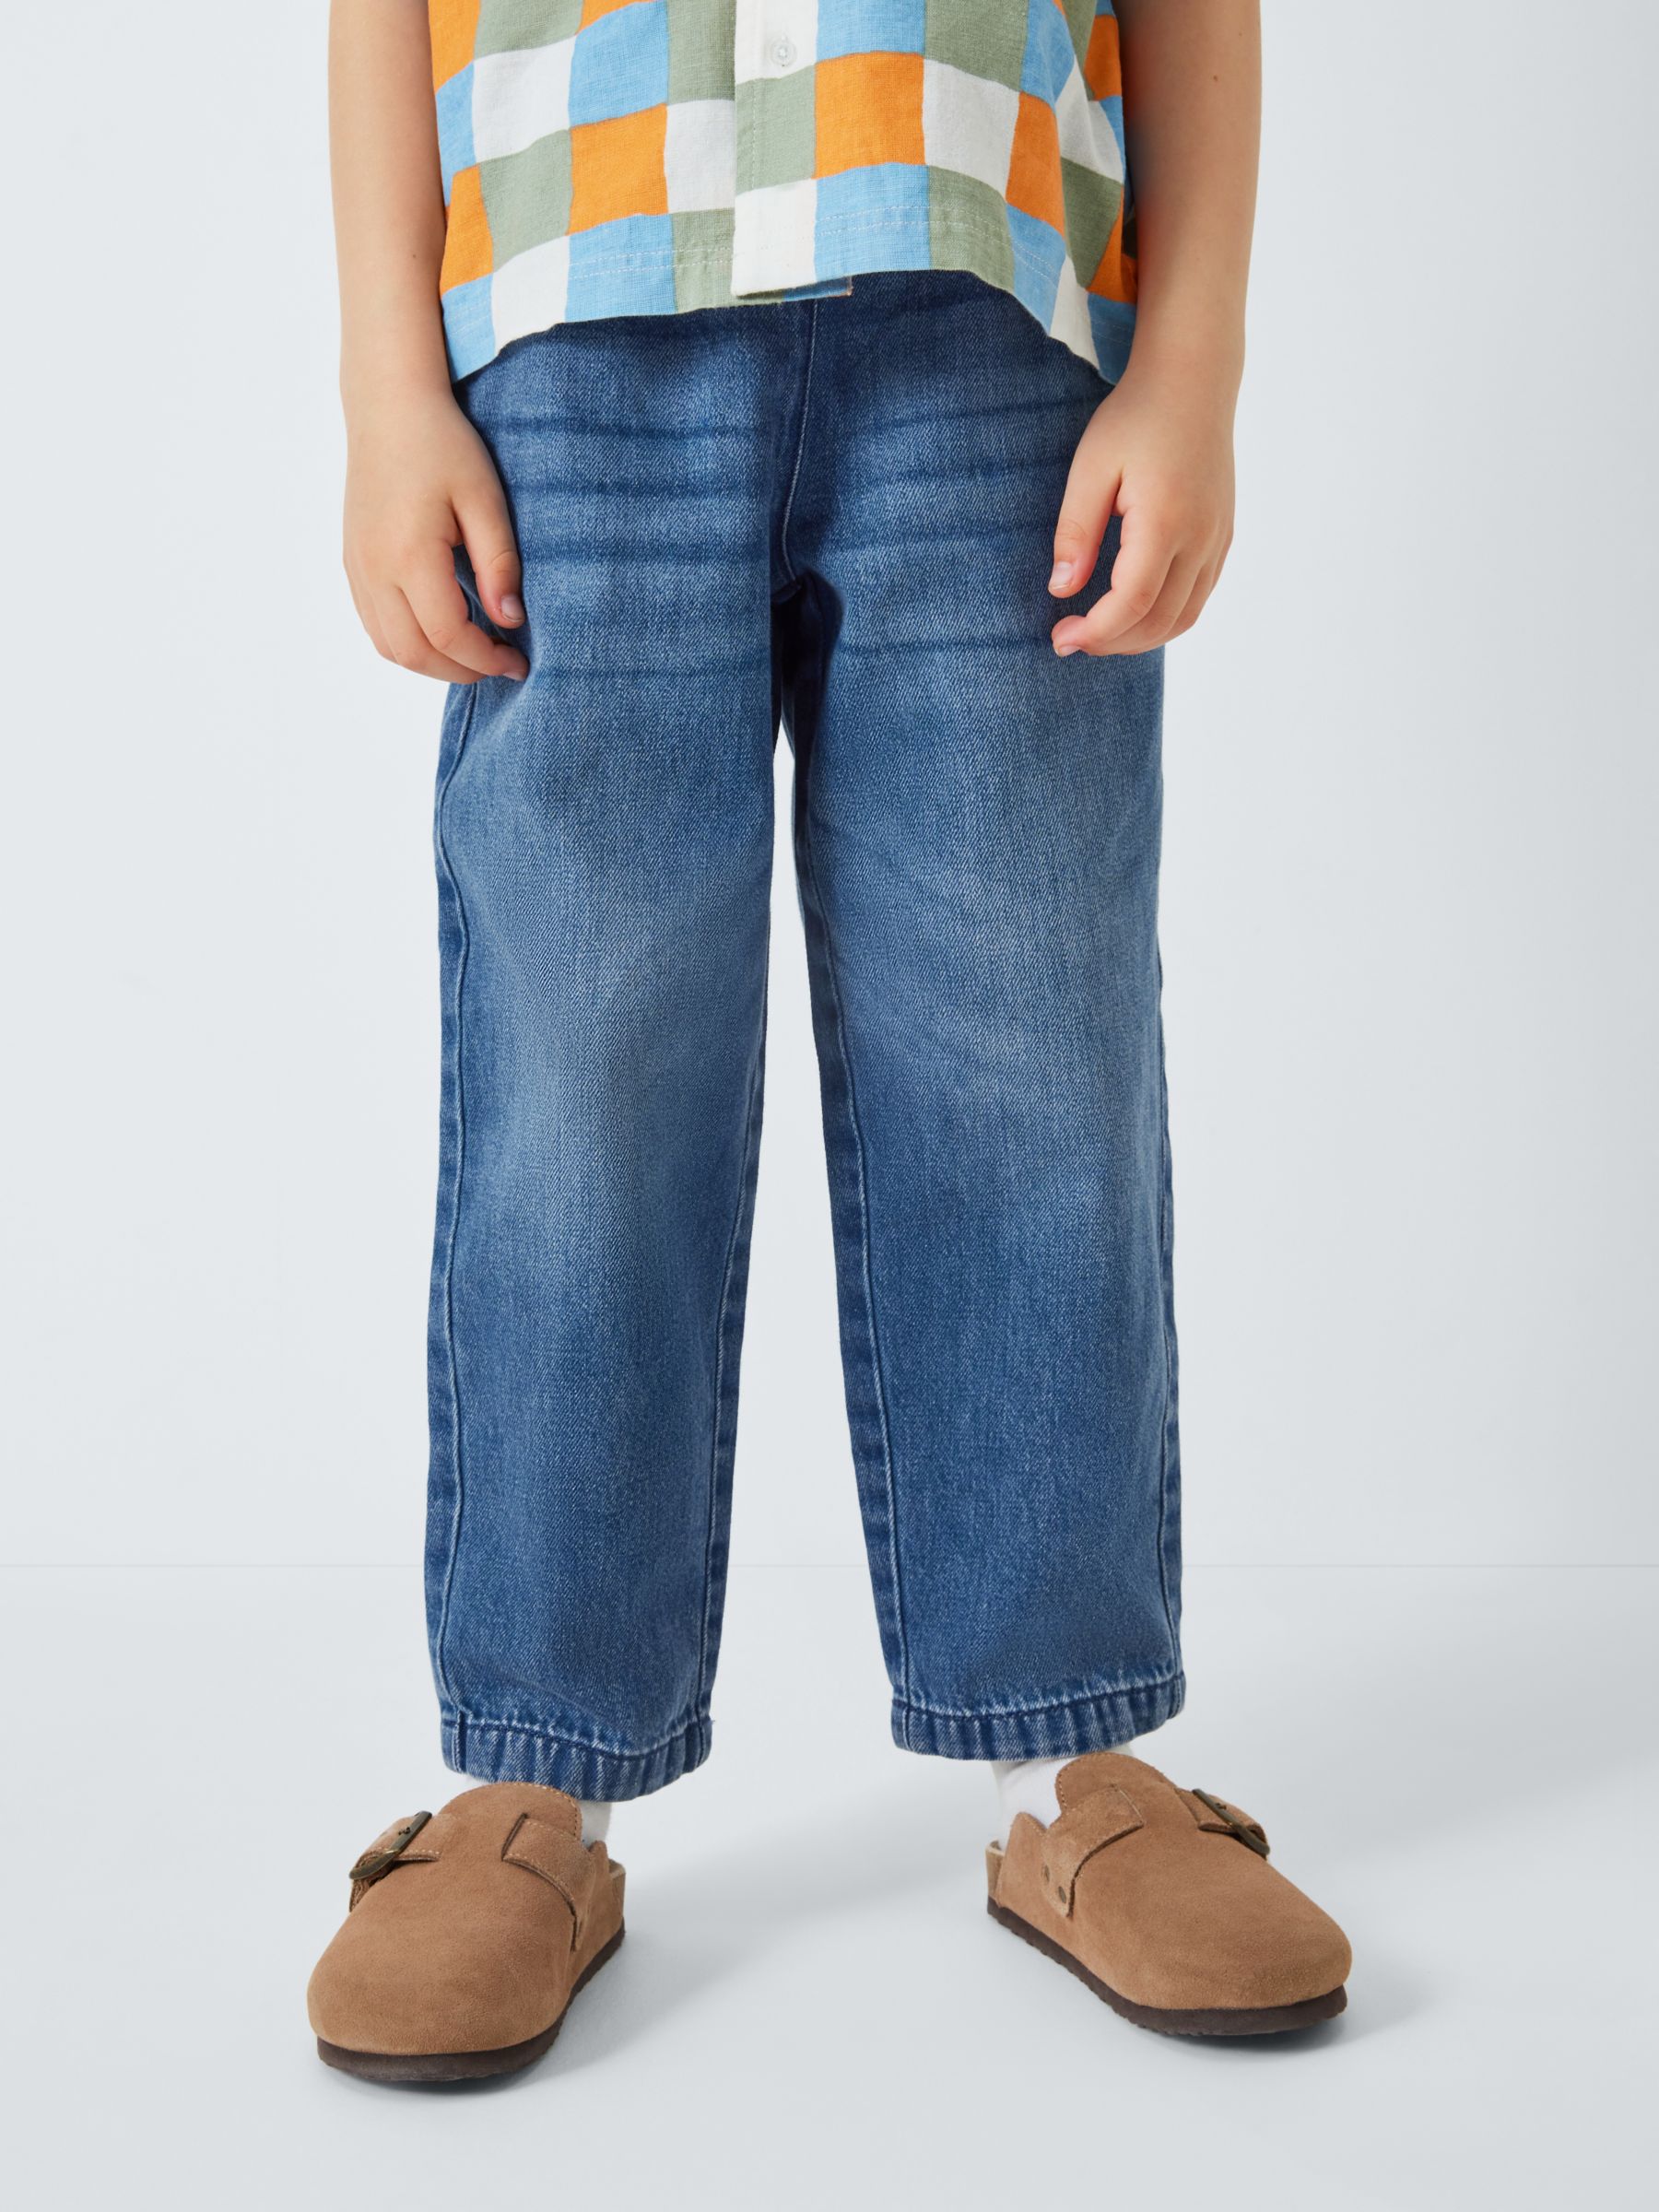 John Lewis ANYDAY Boy's Denim Pull-On Trousers, Blue, 11 years